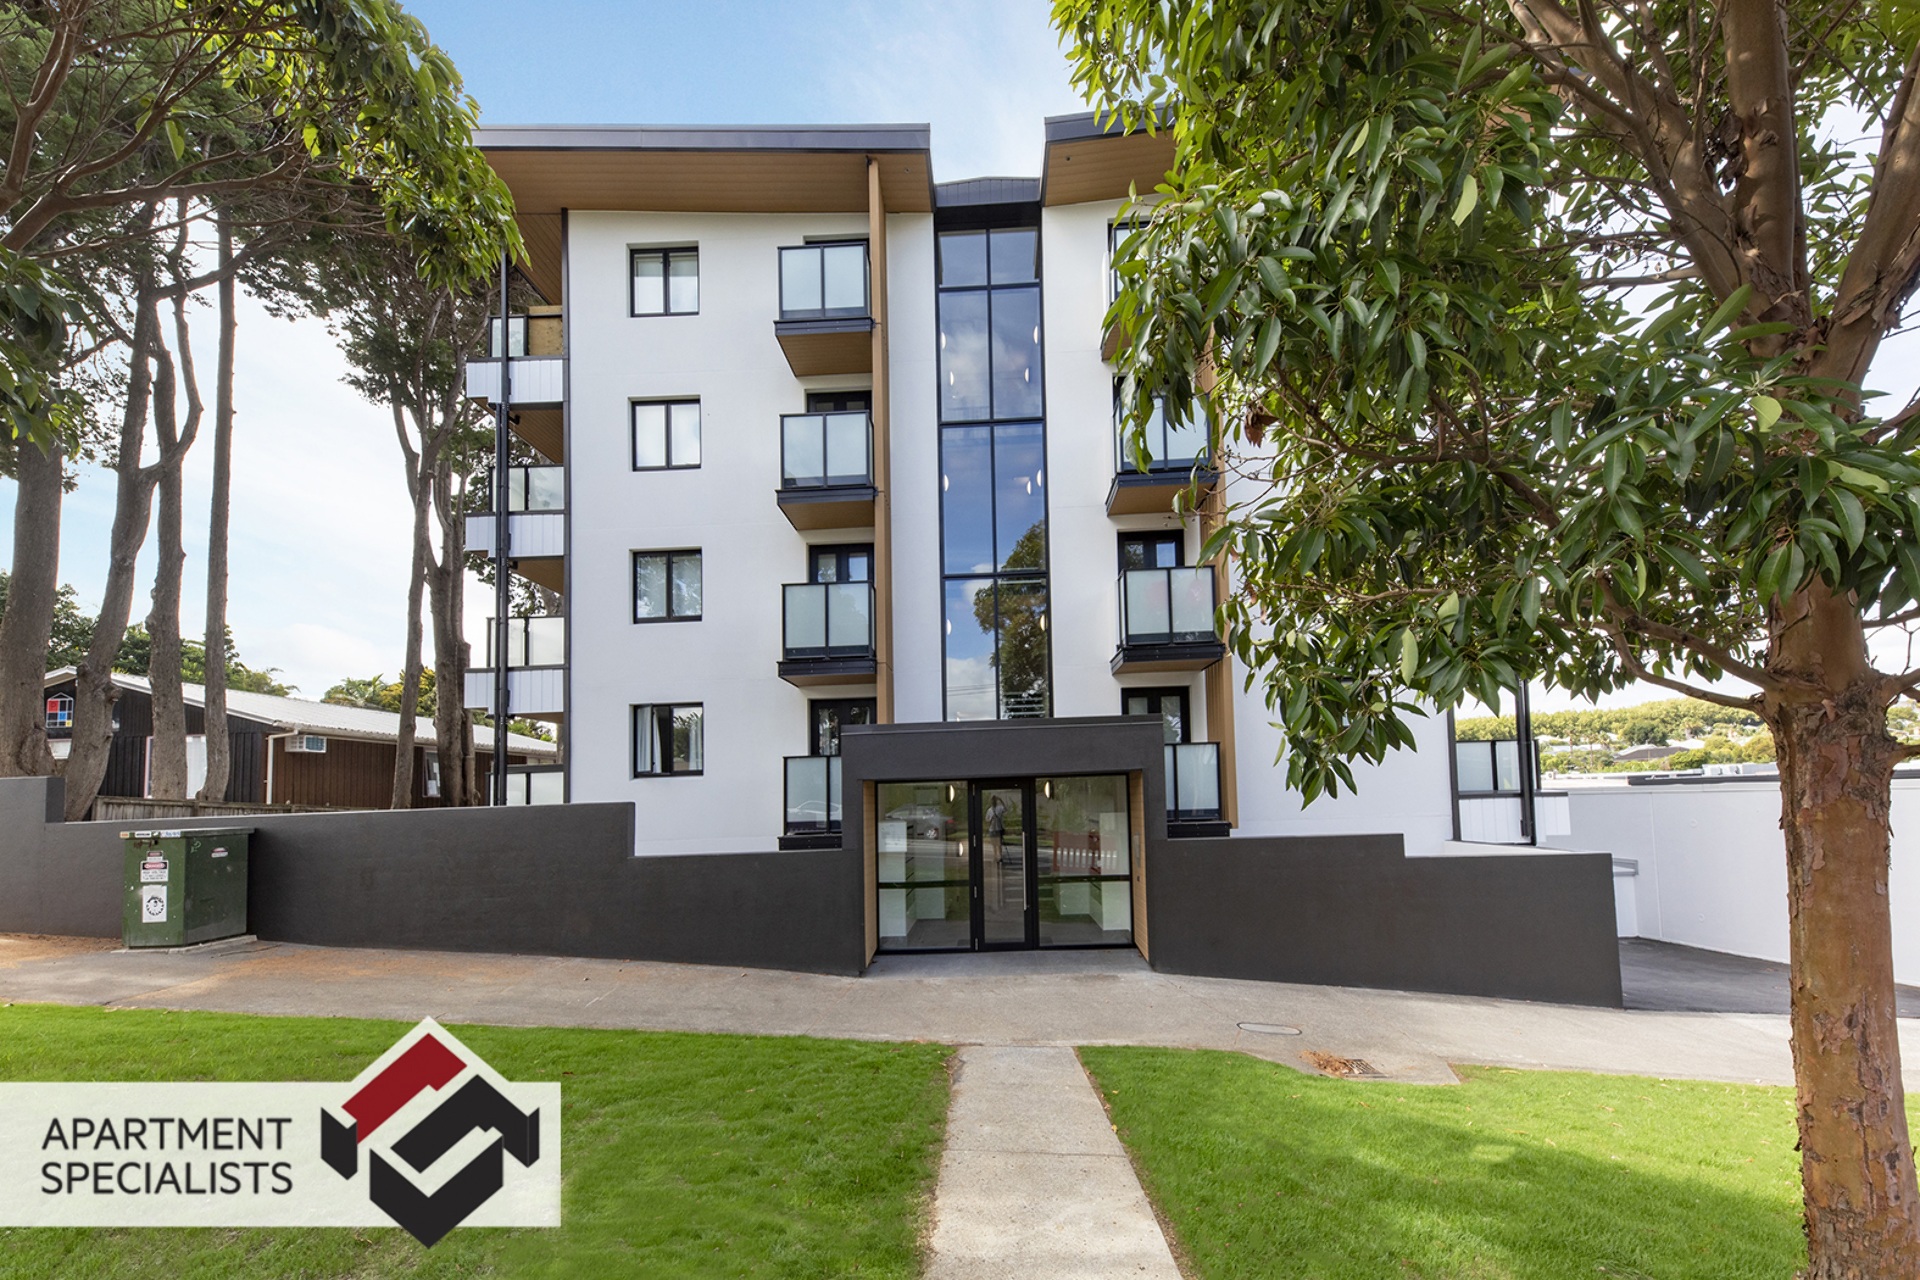 2 | 250 Richmond Road, Ponsonby | Apartment Specialists